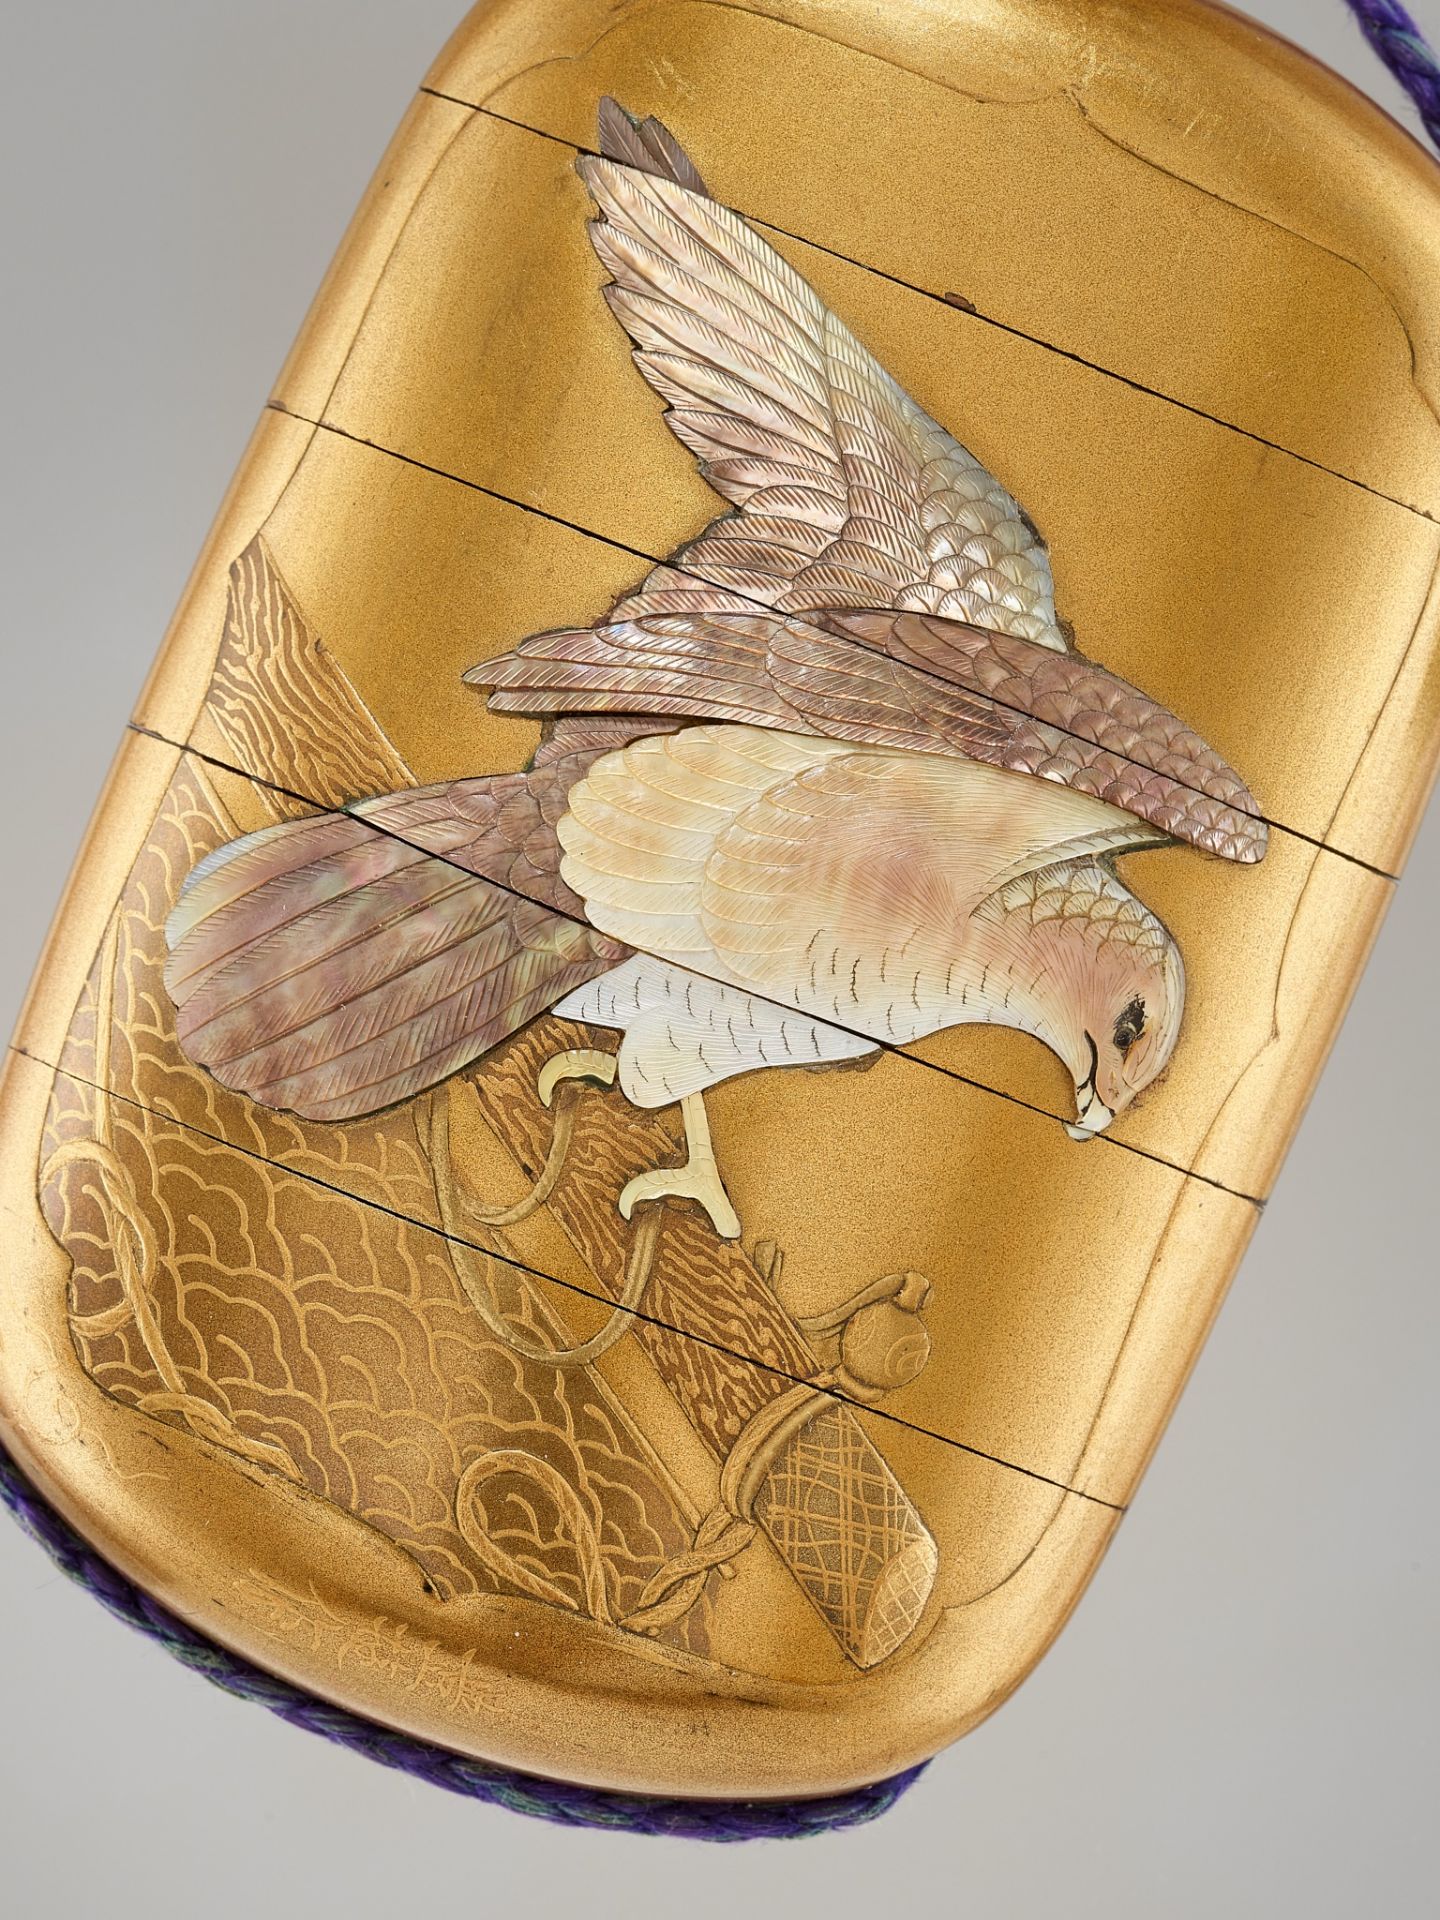 HOYU: A FINE SHIBAYAMA INLAID GOLD LACQUER FOUR-CASE INRO WITH HAWKS - Image 4 of 9